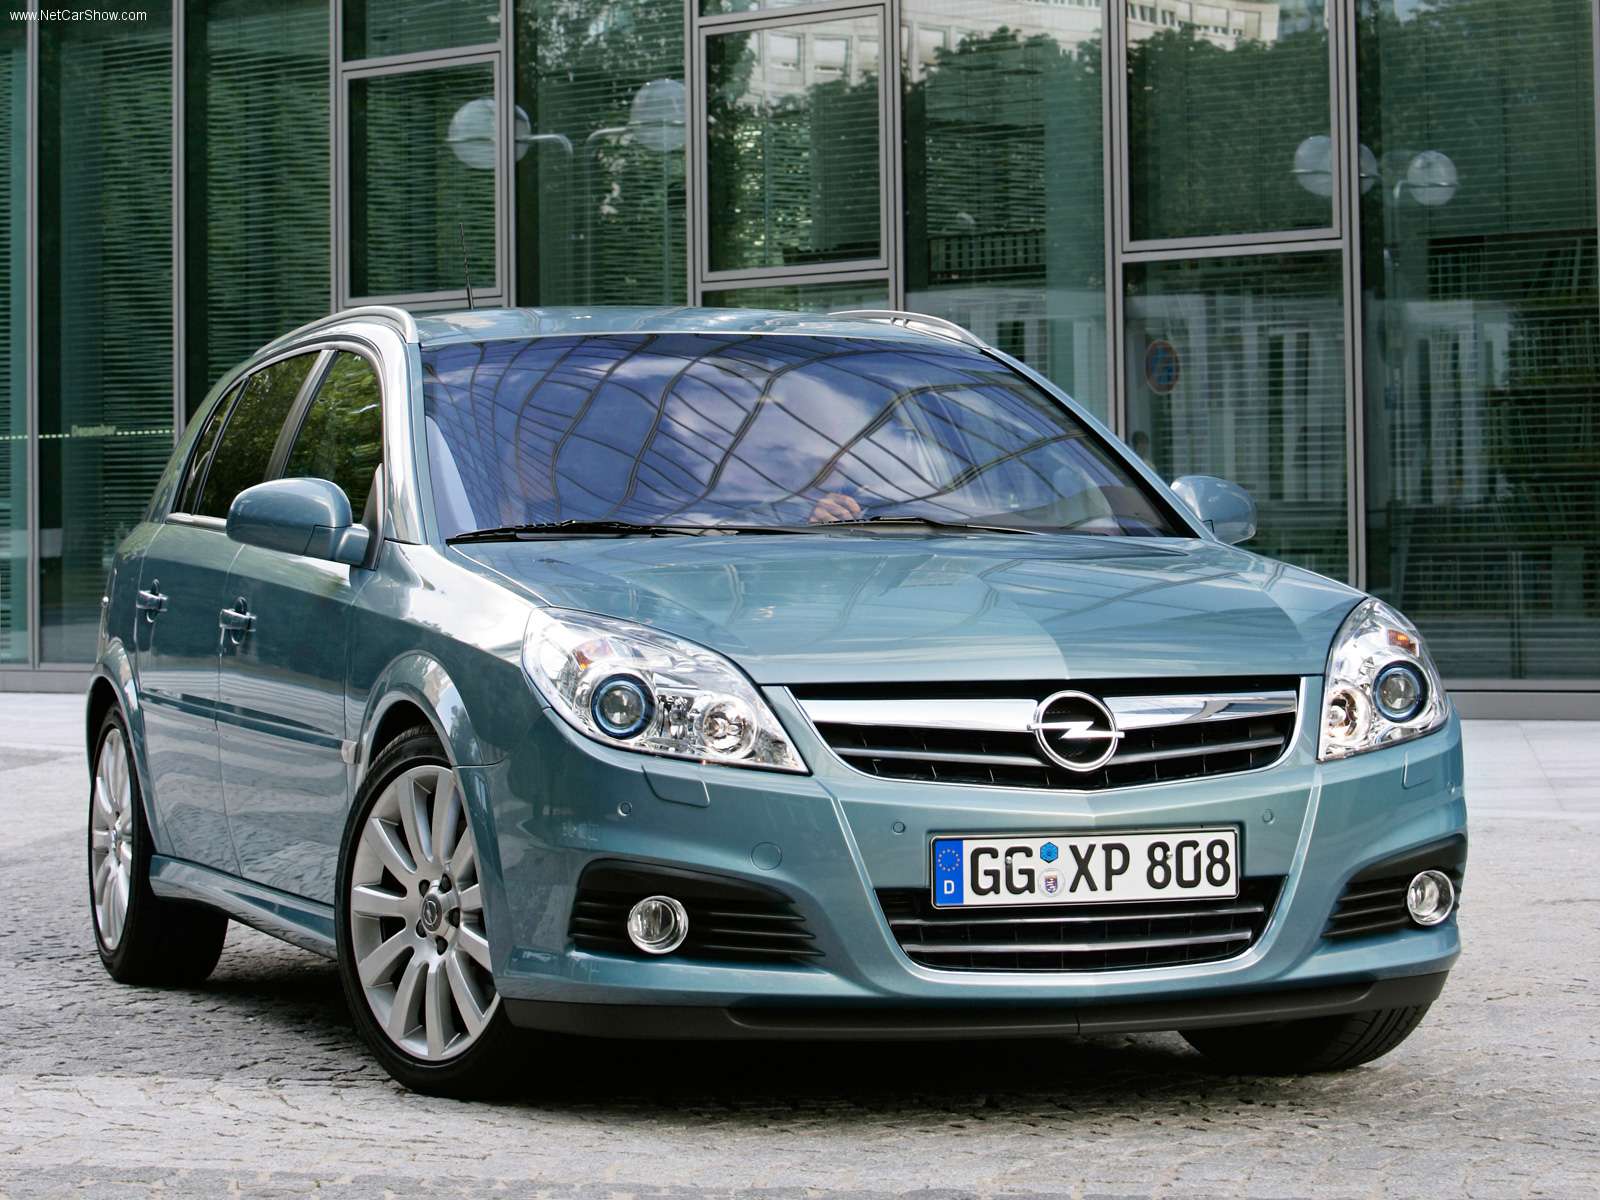 The 2006 Opel Signum has an engine powered by finest engineering of OPEL.